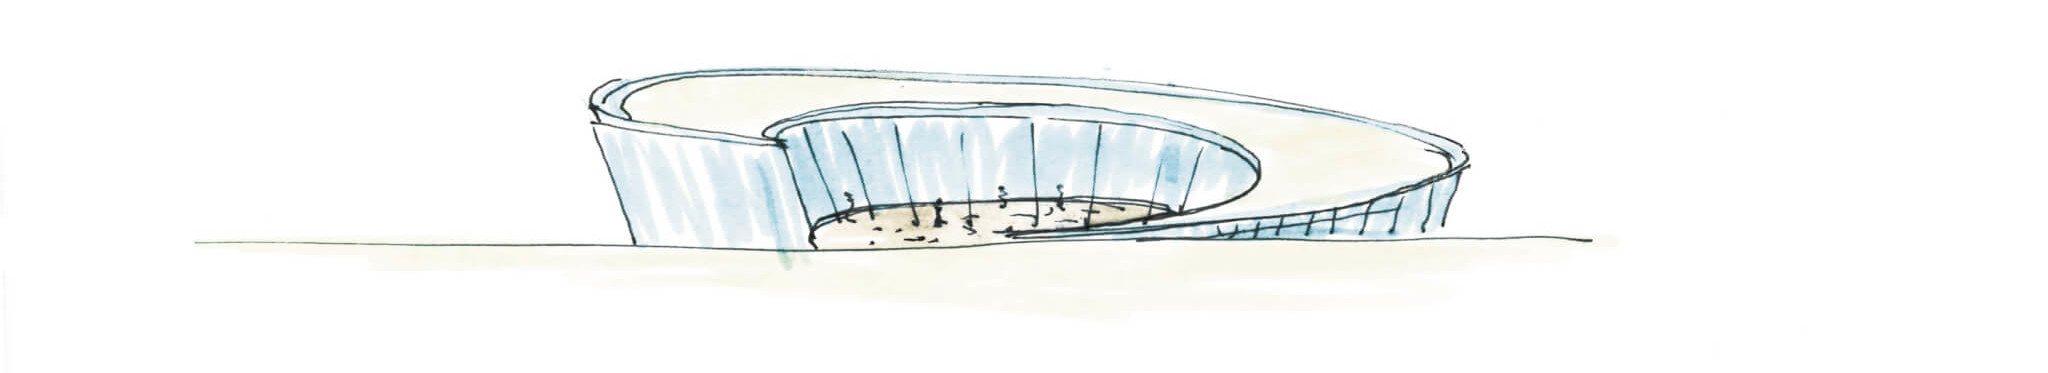 illustration of a tapered circular building